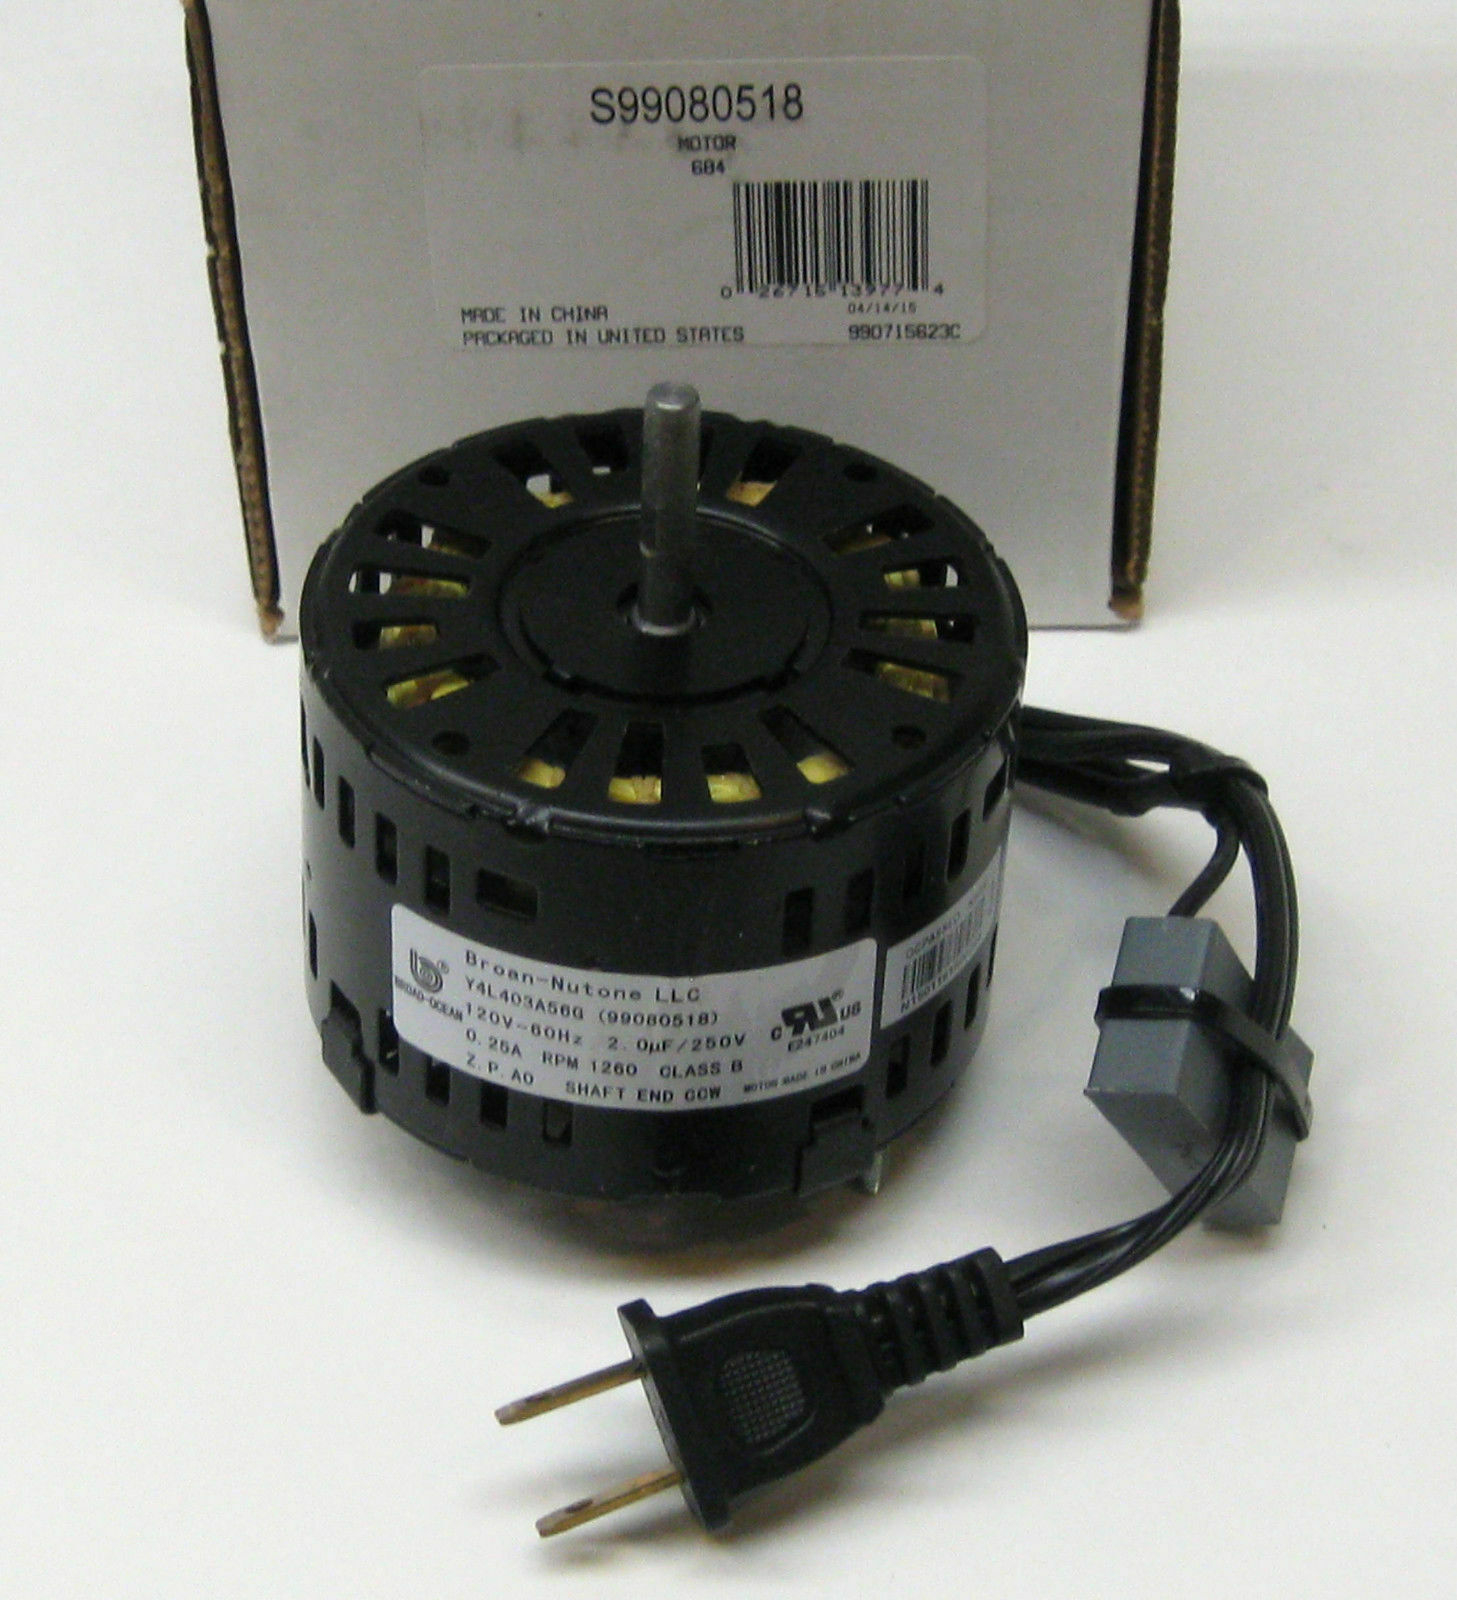 S99080518 Broan Vent Fan Blower Motor For Ja2c227 97009753 7173 0149 99080346 with regard to dimensions 1457 X 1600